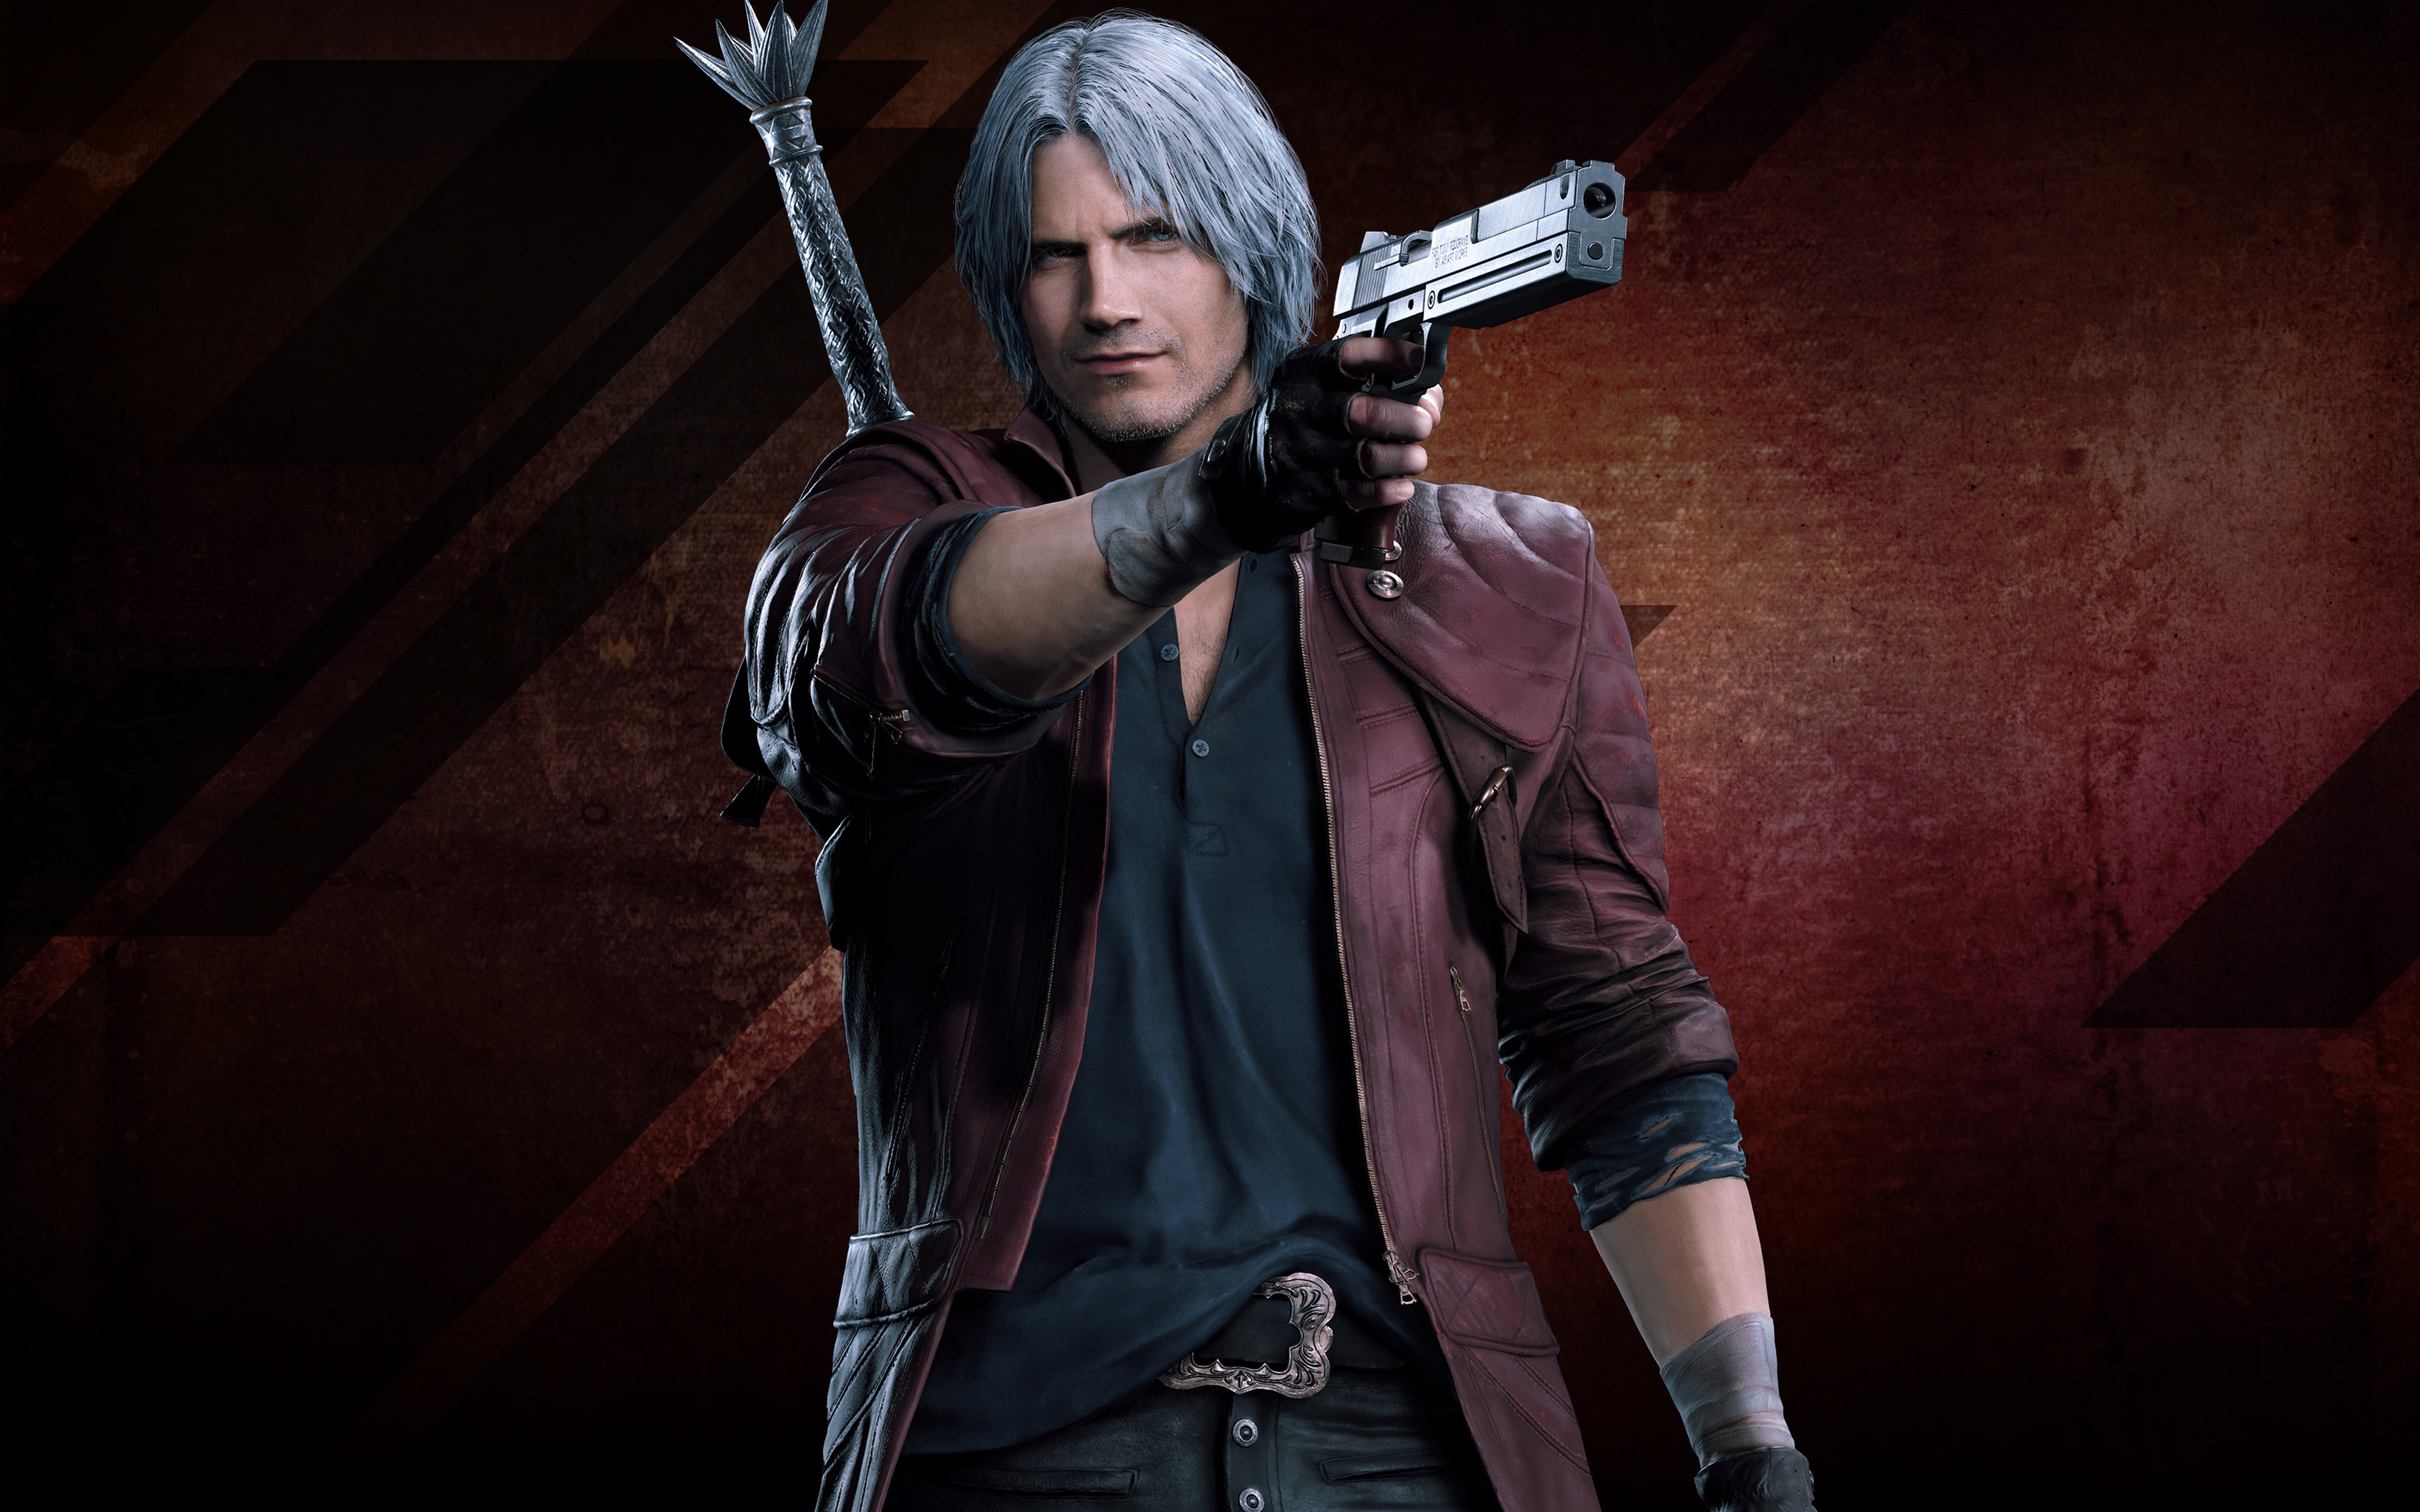 Devil may cry game. Данте Devil May Cry. Данте Devil May Cry 5. Данте из Devil May Cry. Devil May Cry 4 Данте.